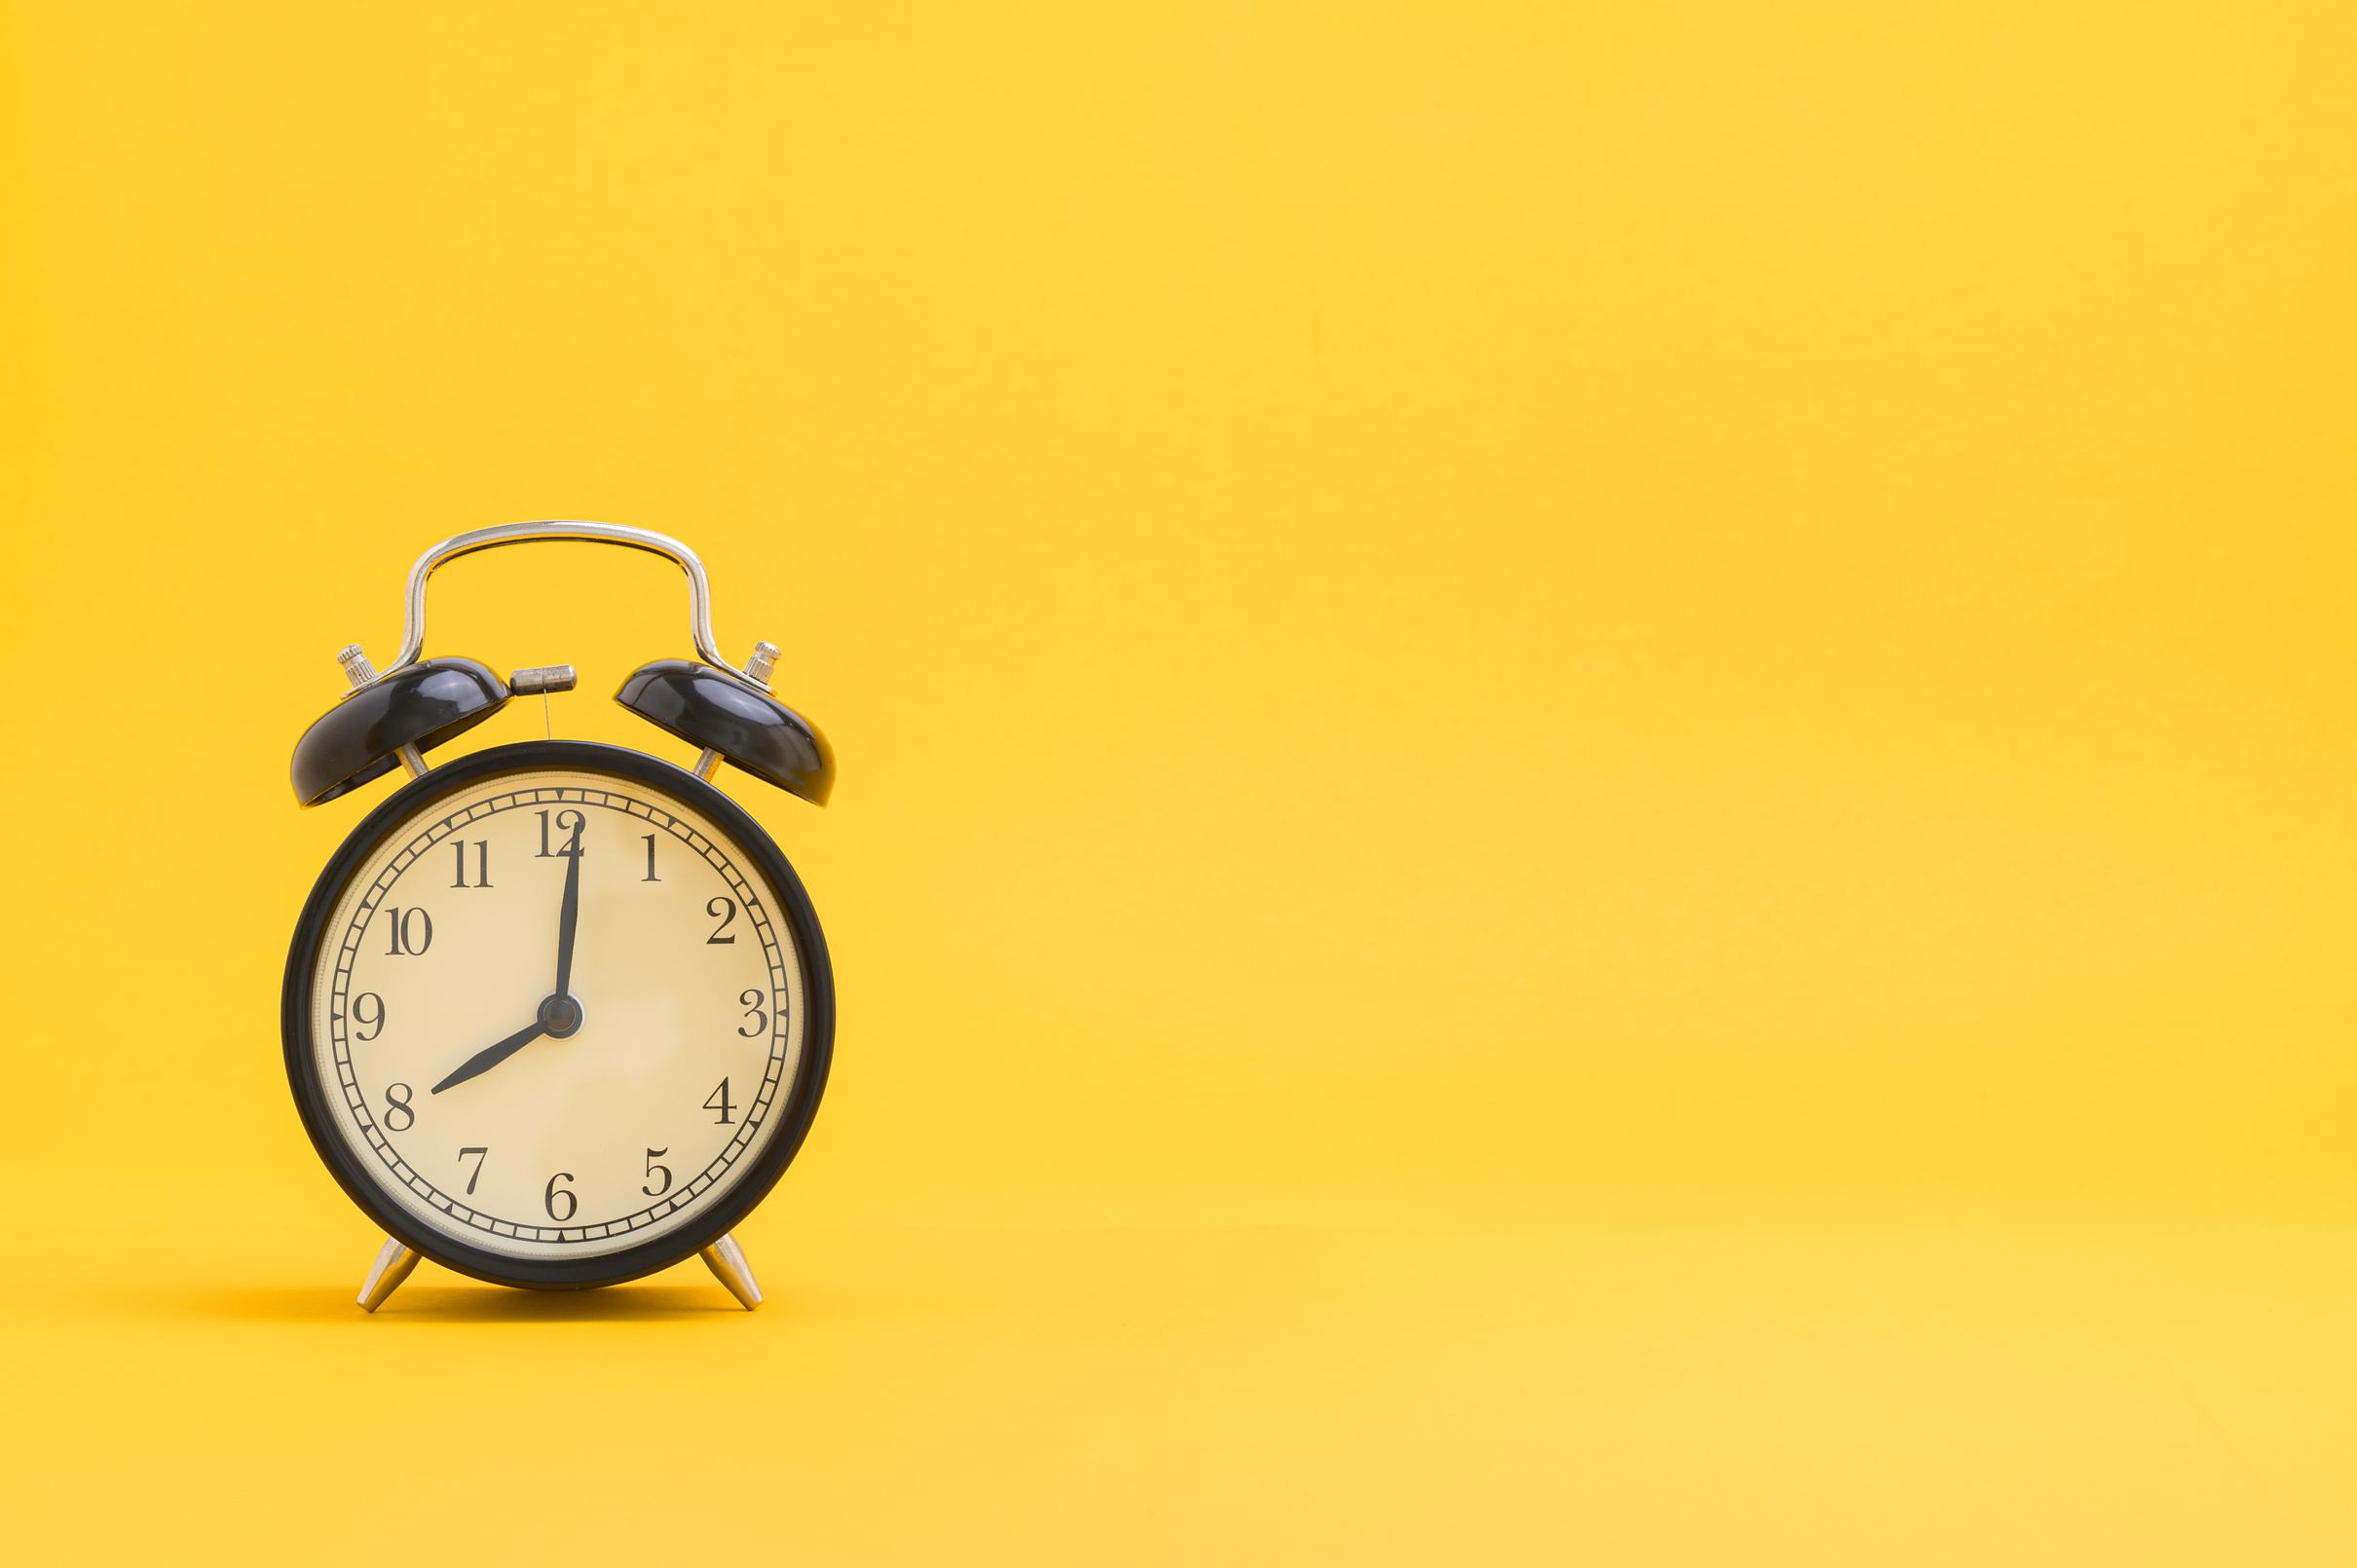 Clock against a Yellow Background